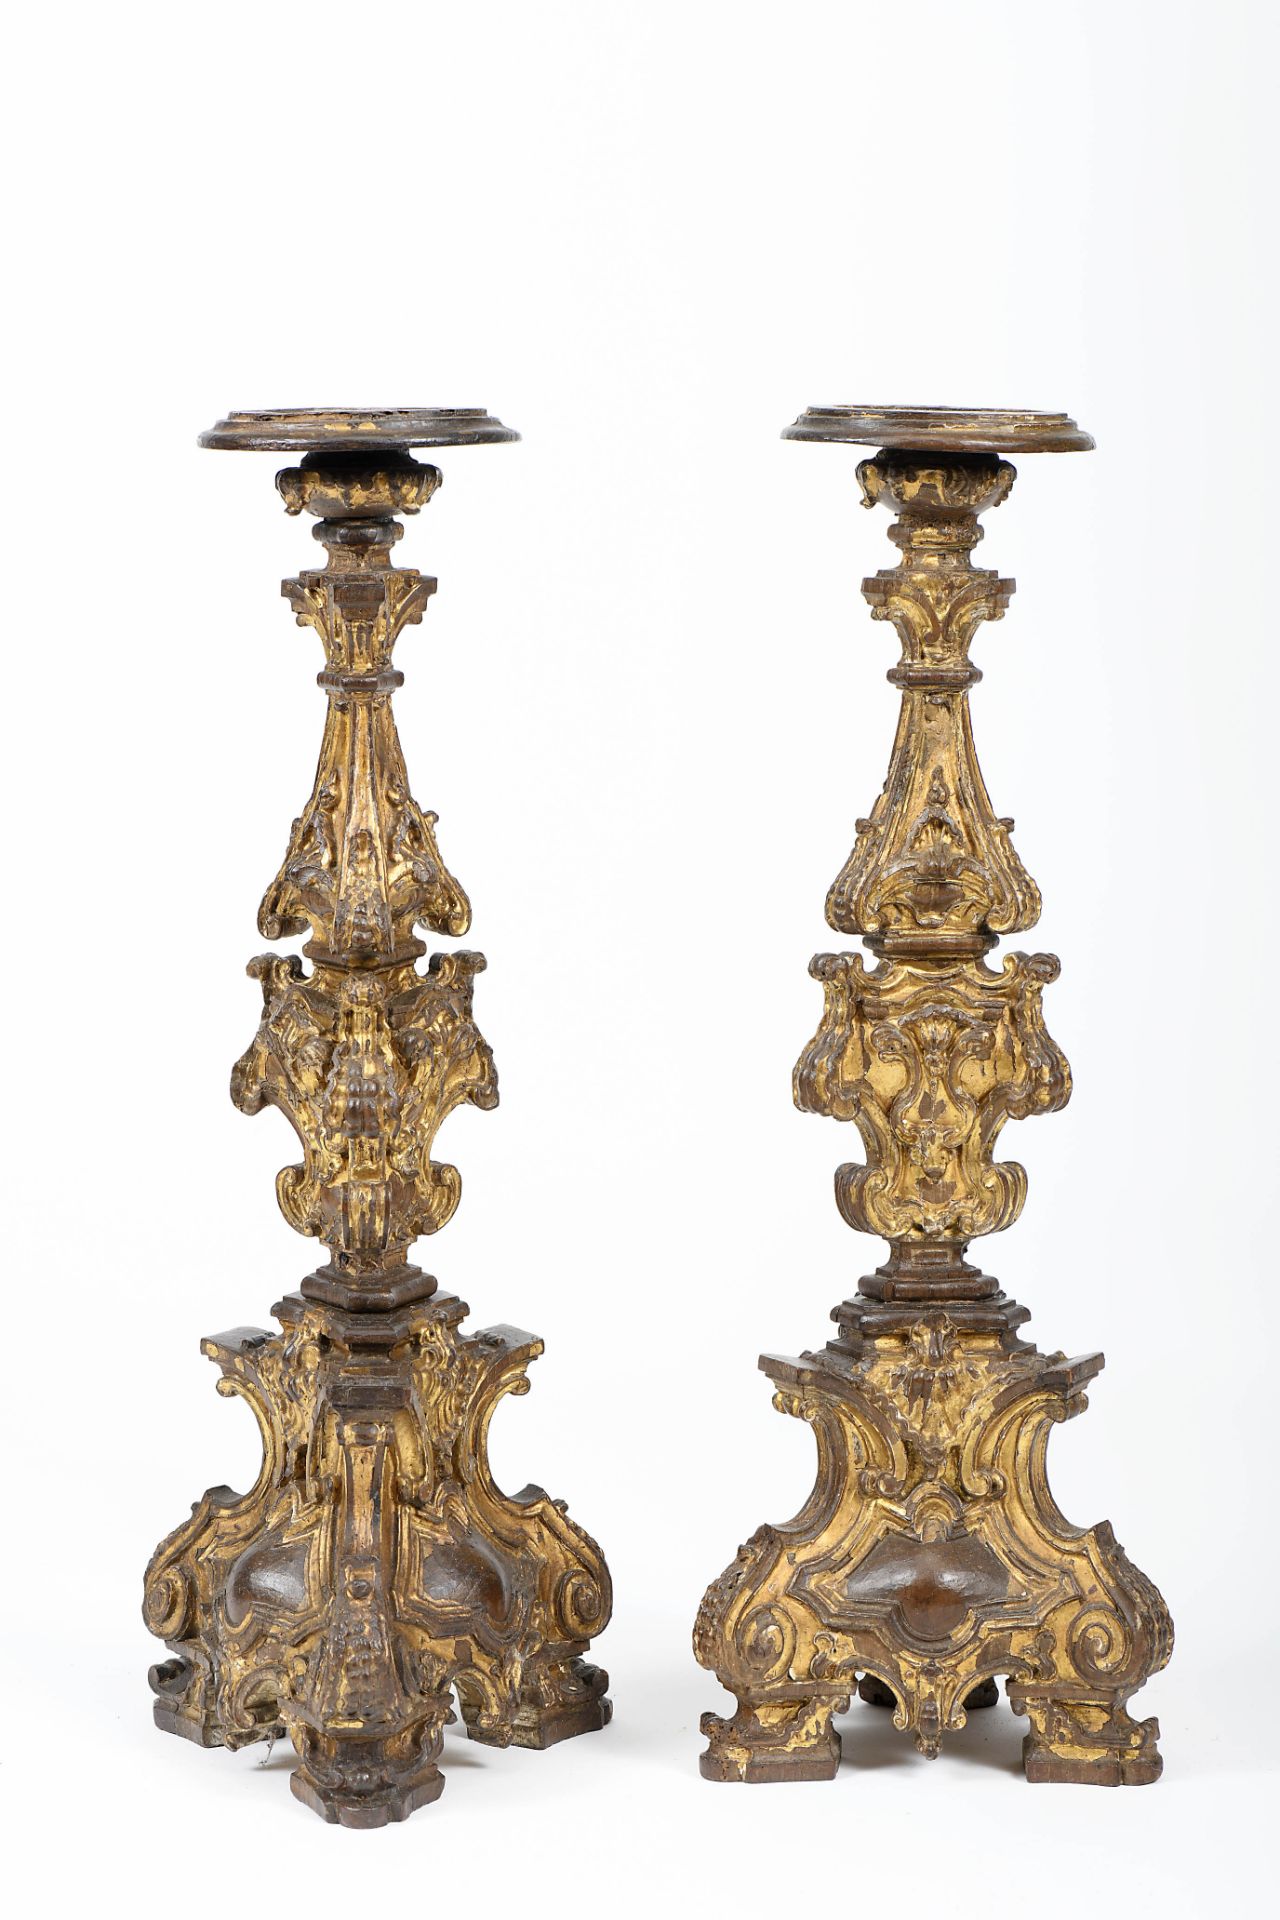 A pair of torchères